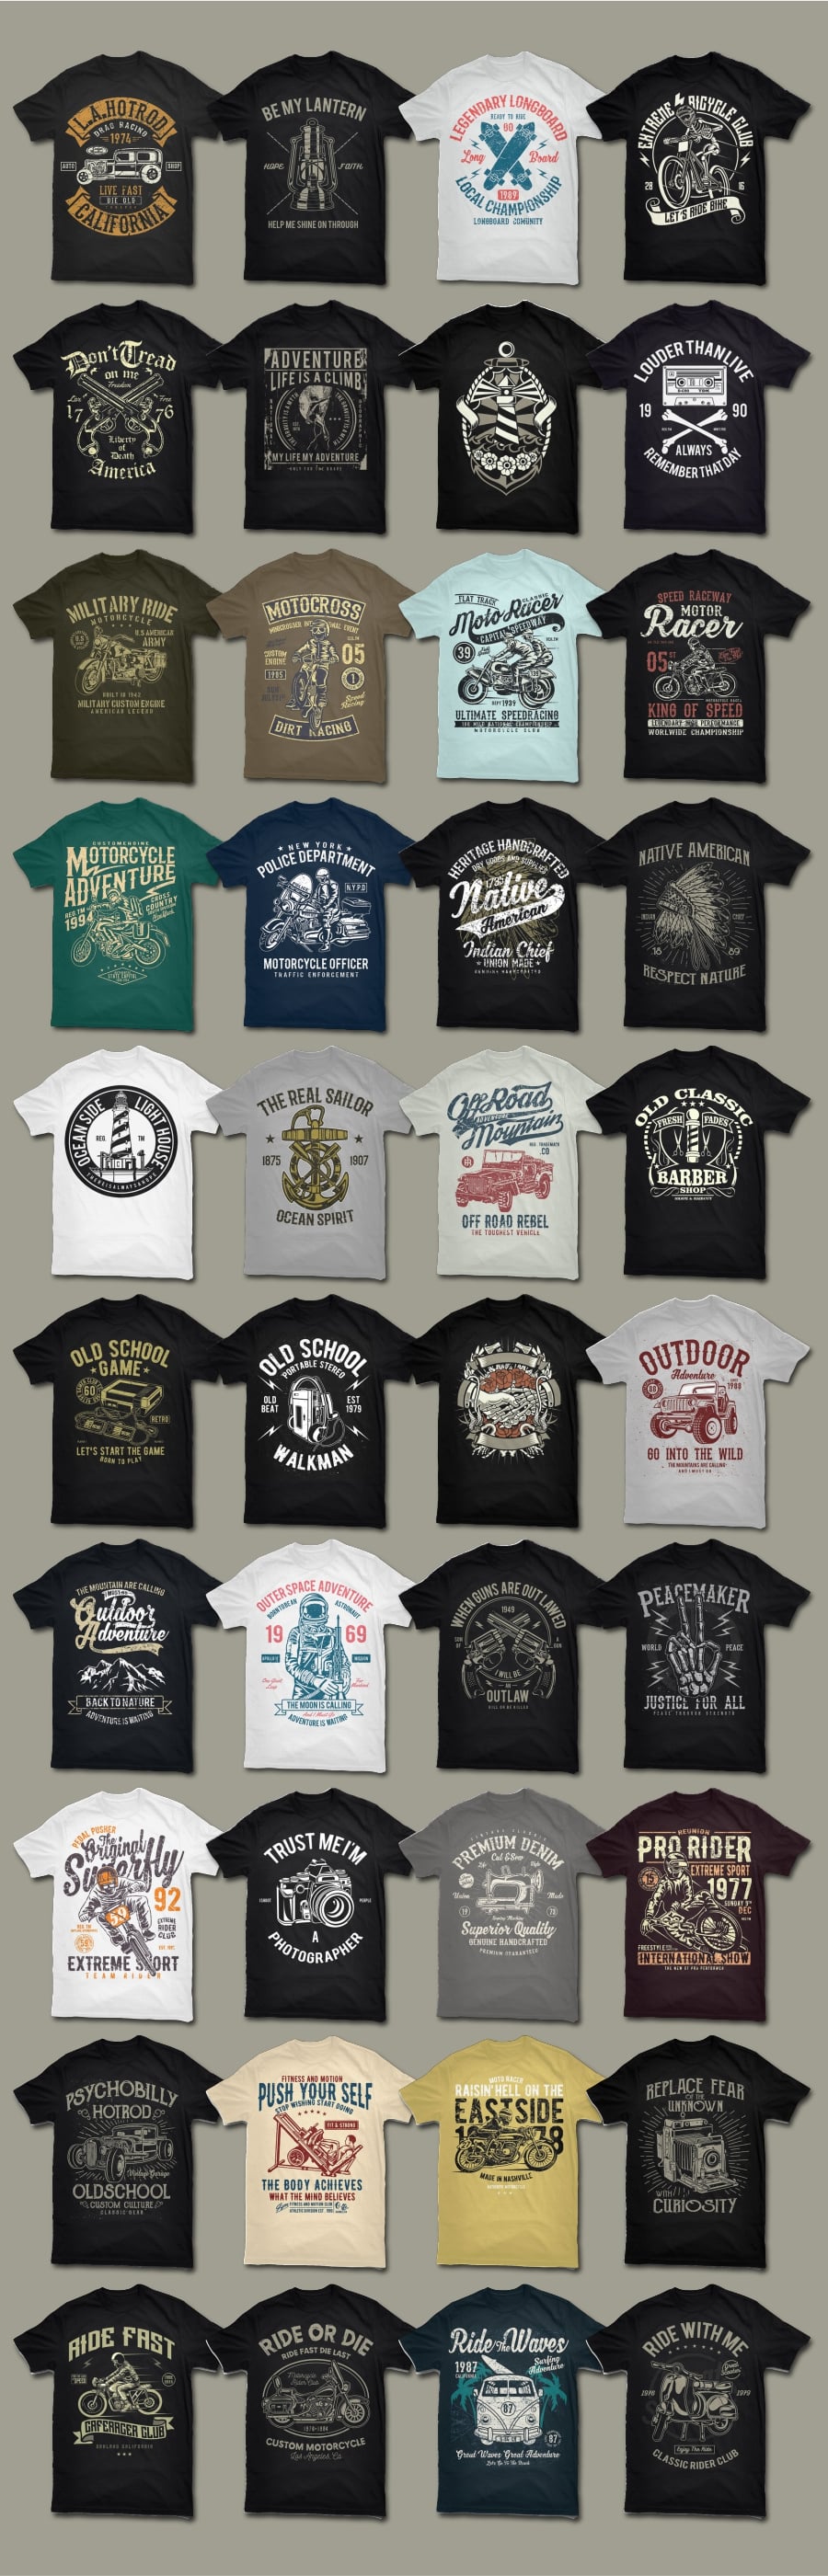 T-shirts with high quality craft images.